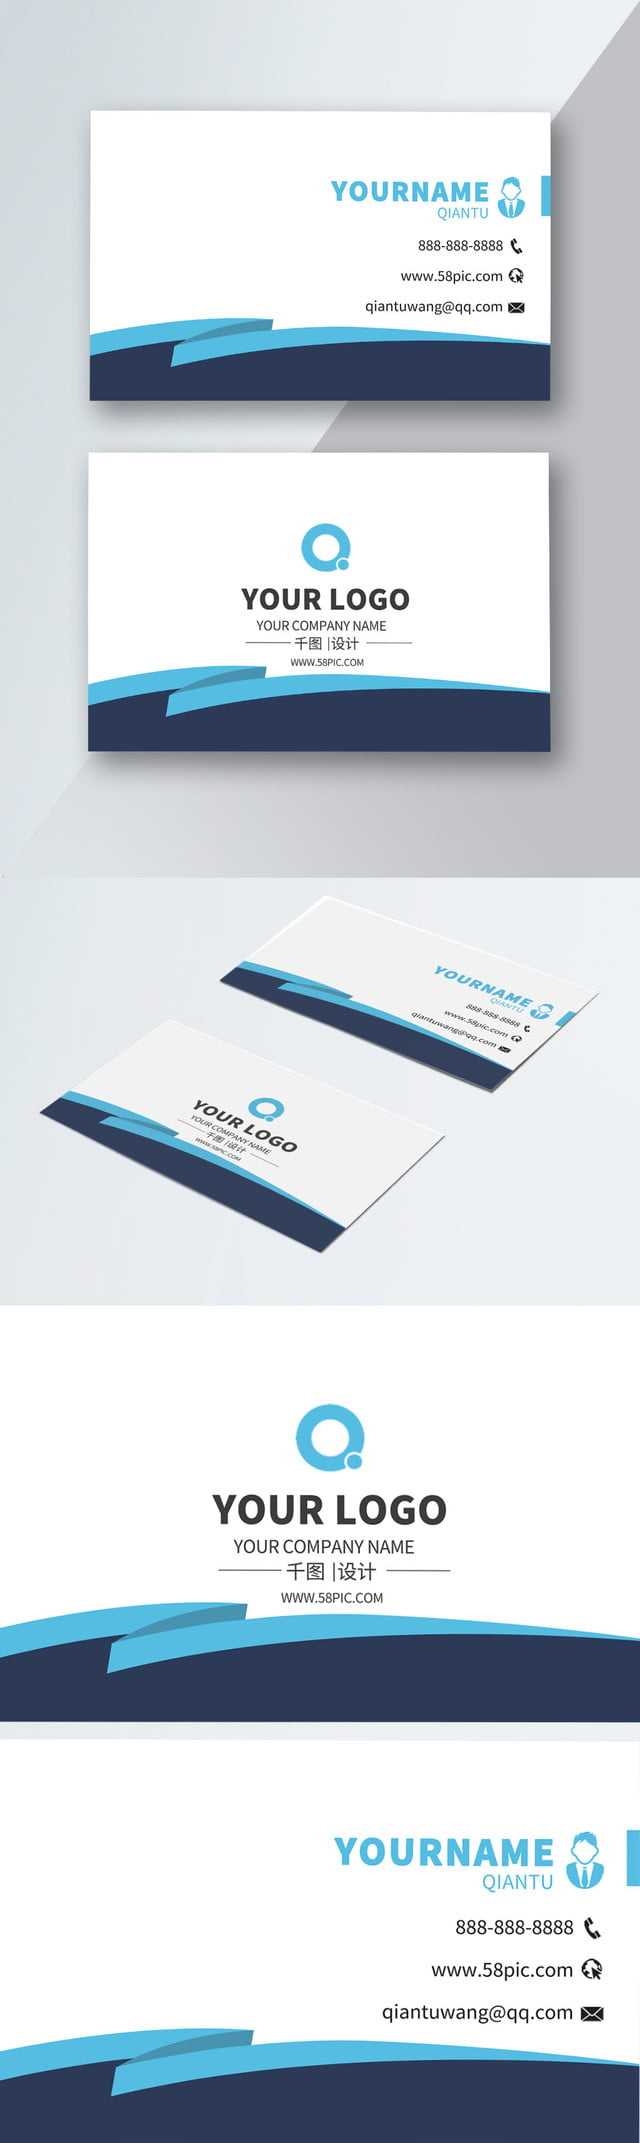 Advertising Company Business Card Material Download Regarding Advertising Cards Templates